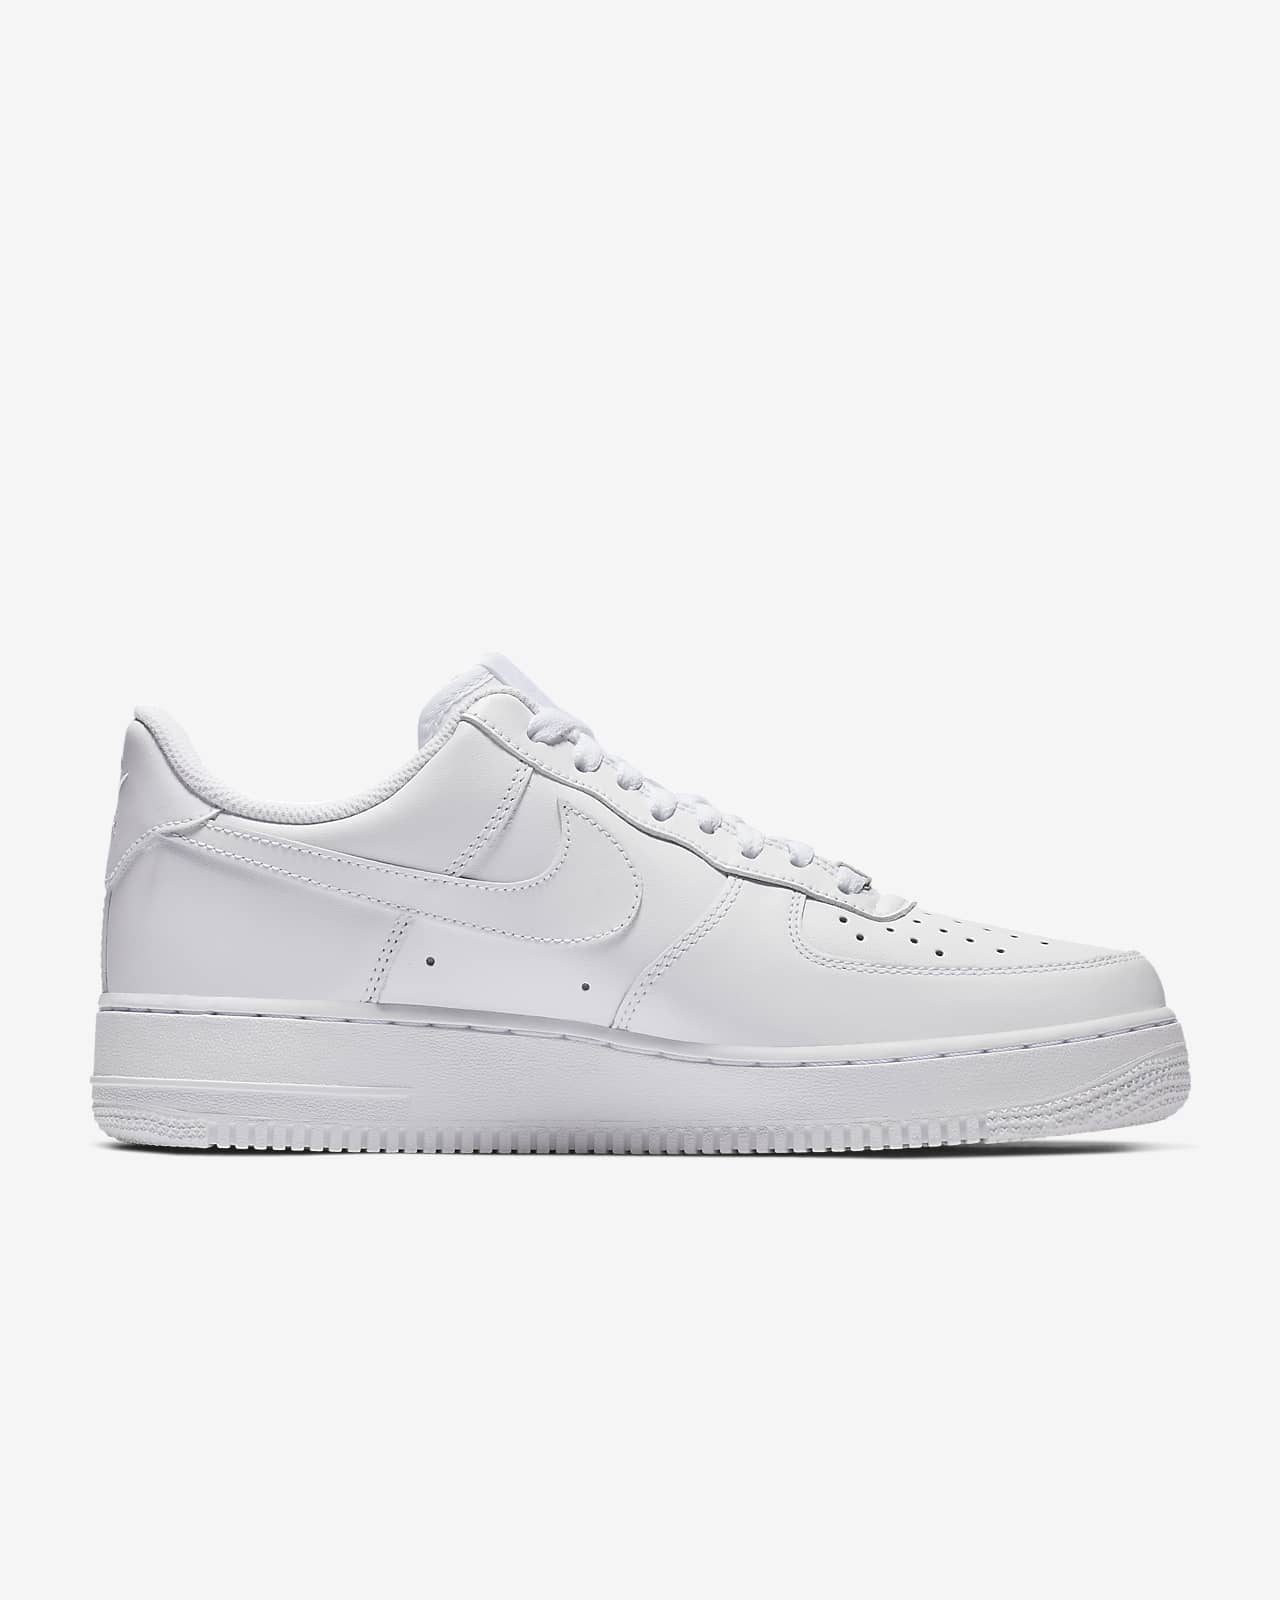 nike air force one womens white size 8